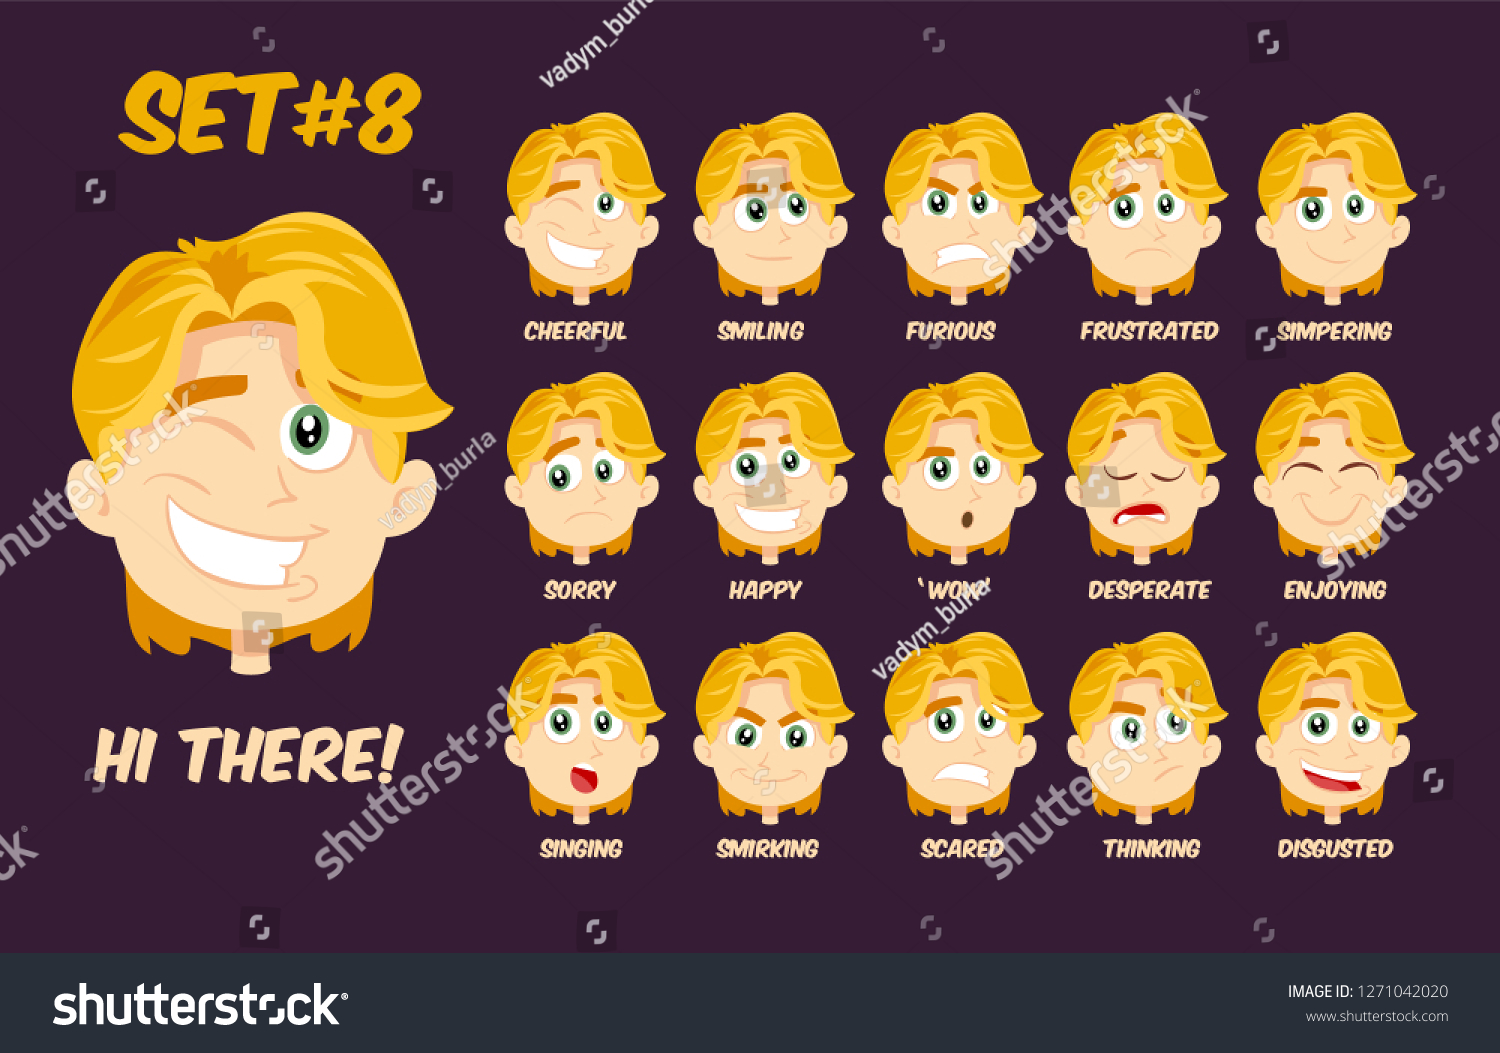 Golden blonde hair drawing - wide 5